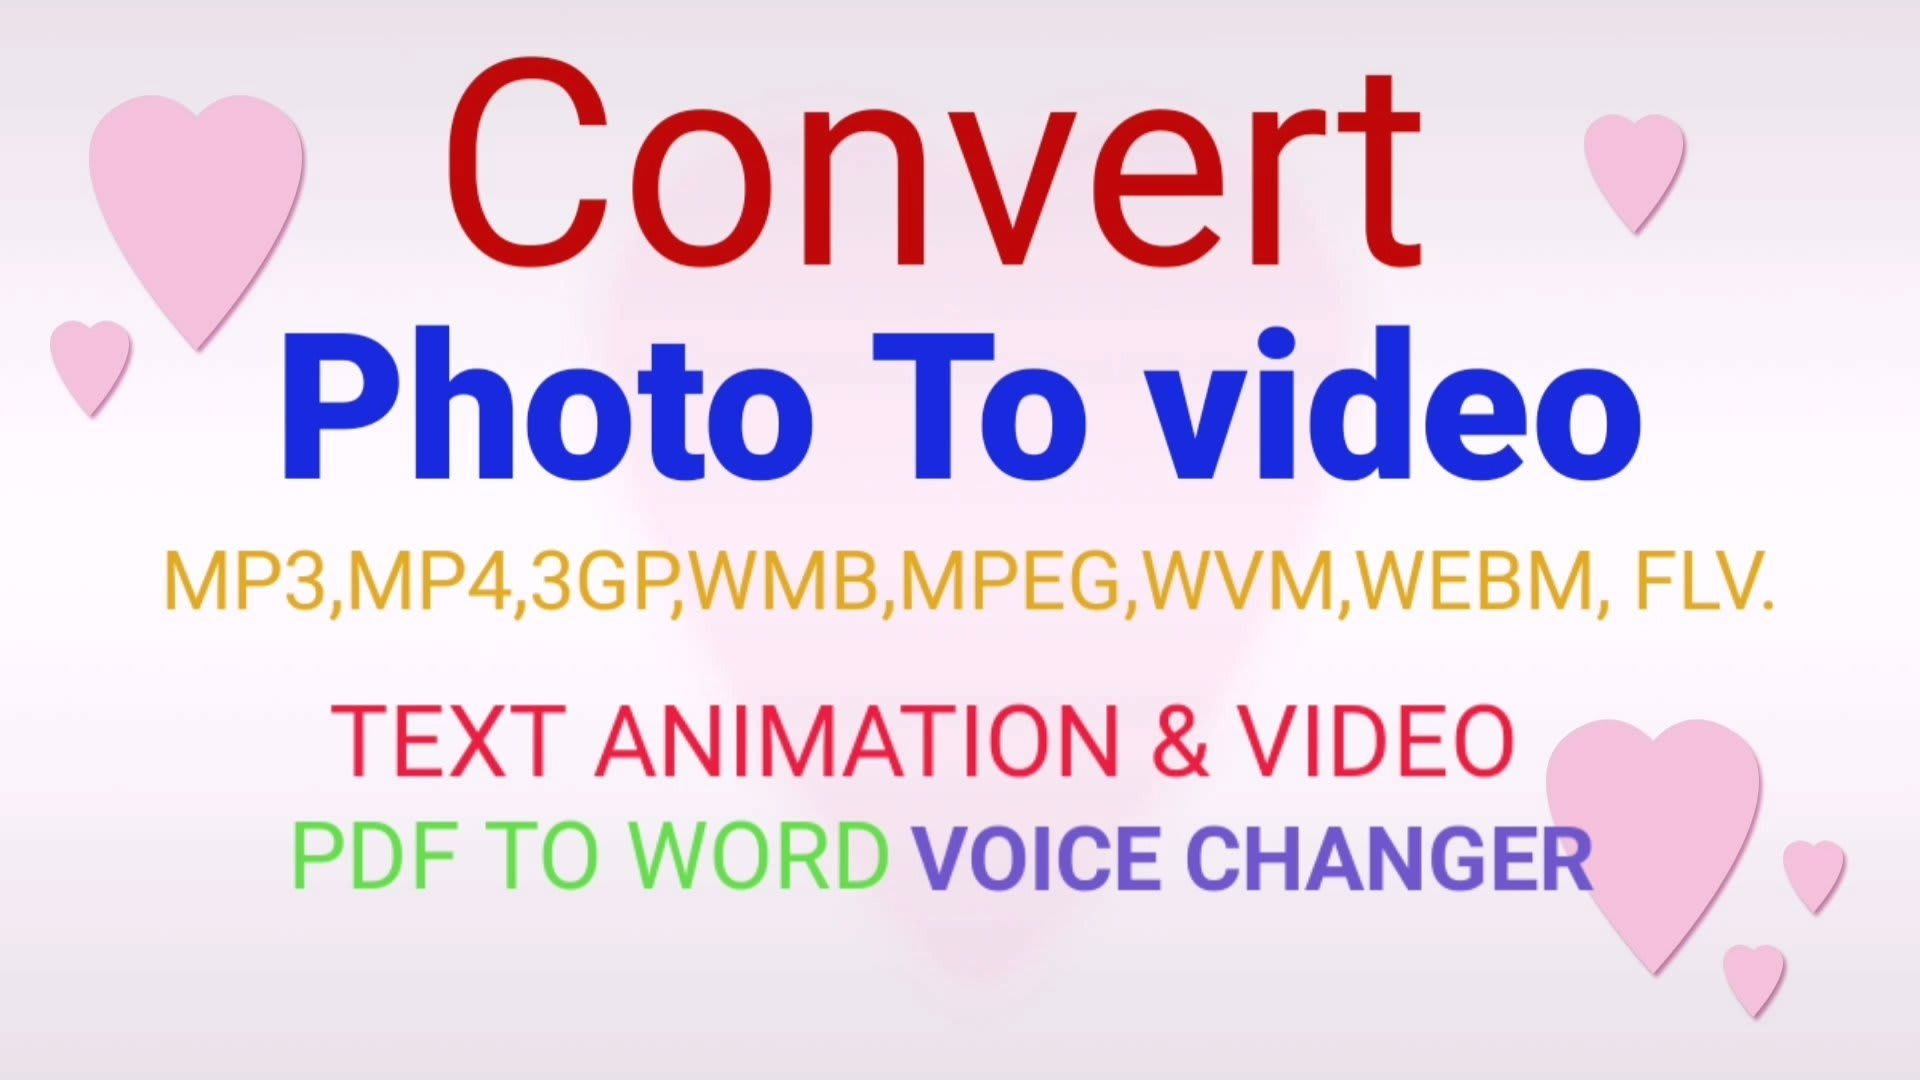 Convert pdf to word,text animation to video, photo to video, by Hasanbd88 |  Fiverr